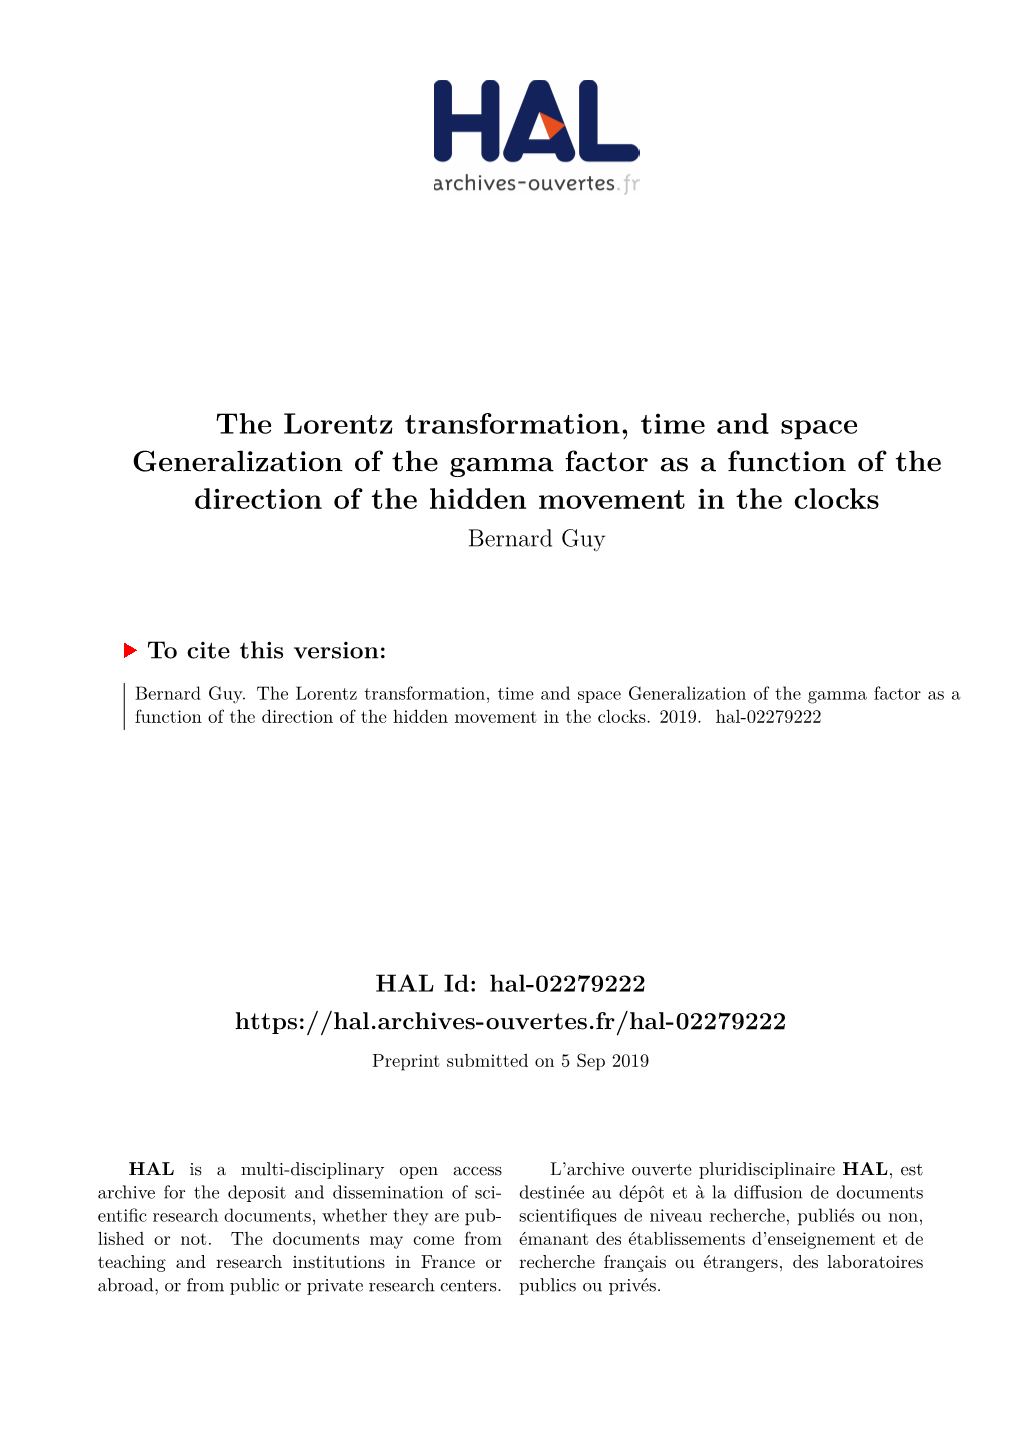 The Lorentz Transformation, Time and Space Generalization of the Gamma Factor As a Function of the Direction of the Hidden Movement in the Clocks Bernard Guy